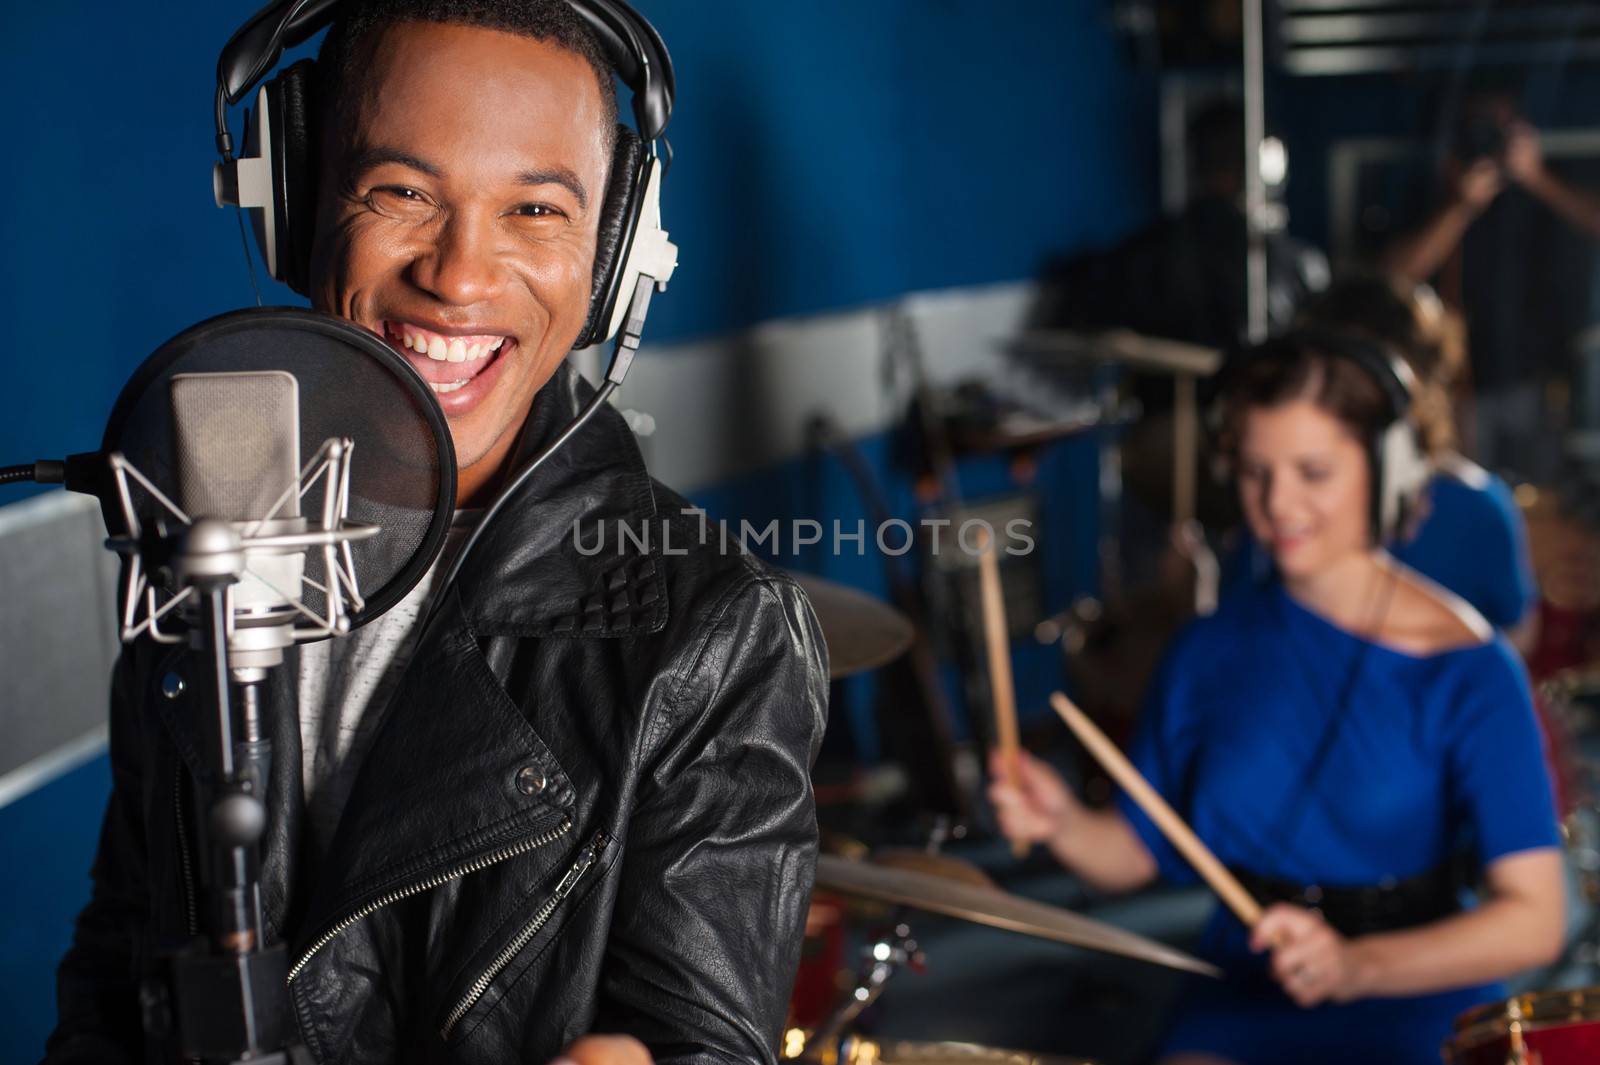 Singer recording a song in studio by stockyimages